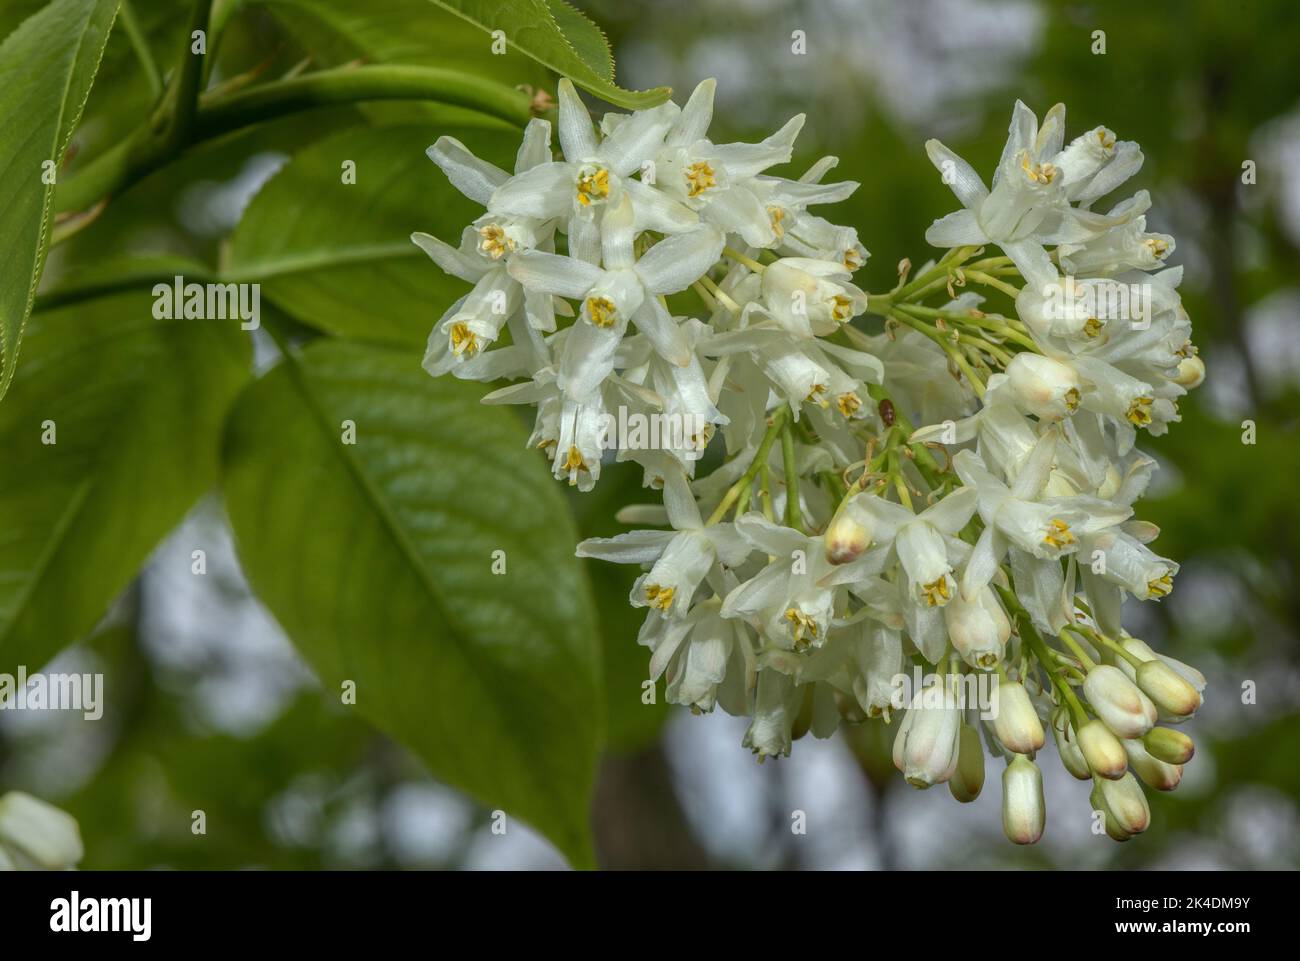 Caucasian bladdernut, Staphylea colchica, in flower, from the Caucasus, Stock Photo